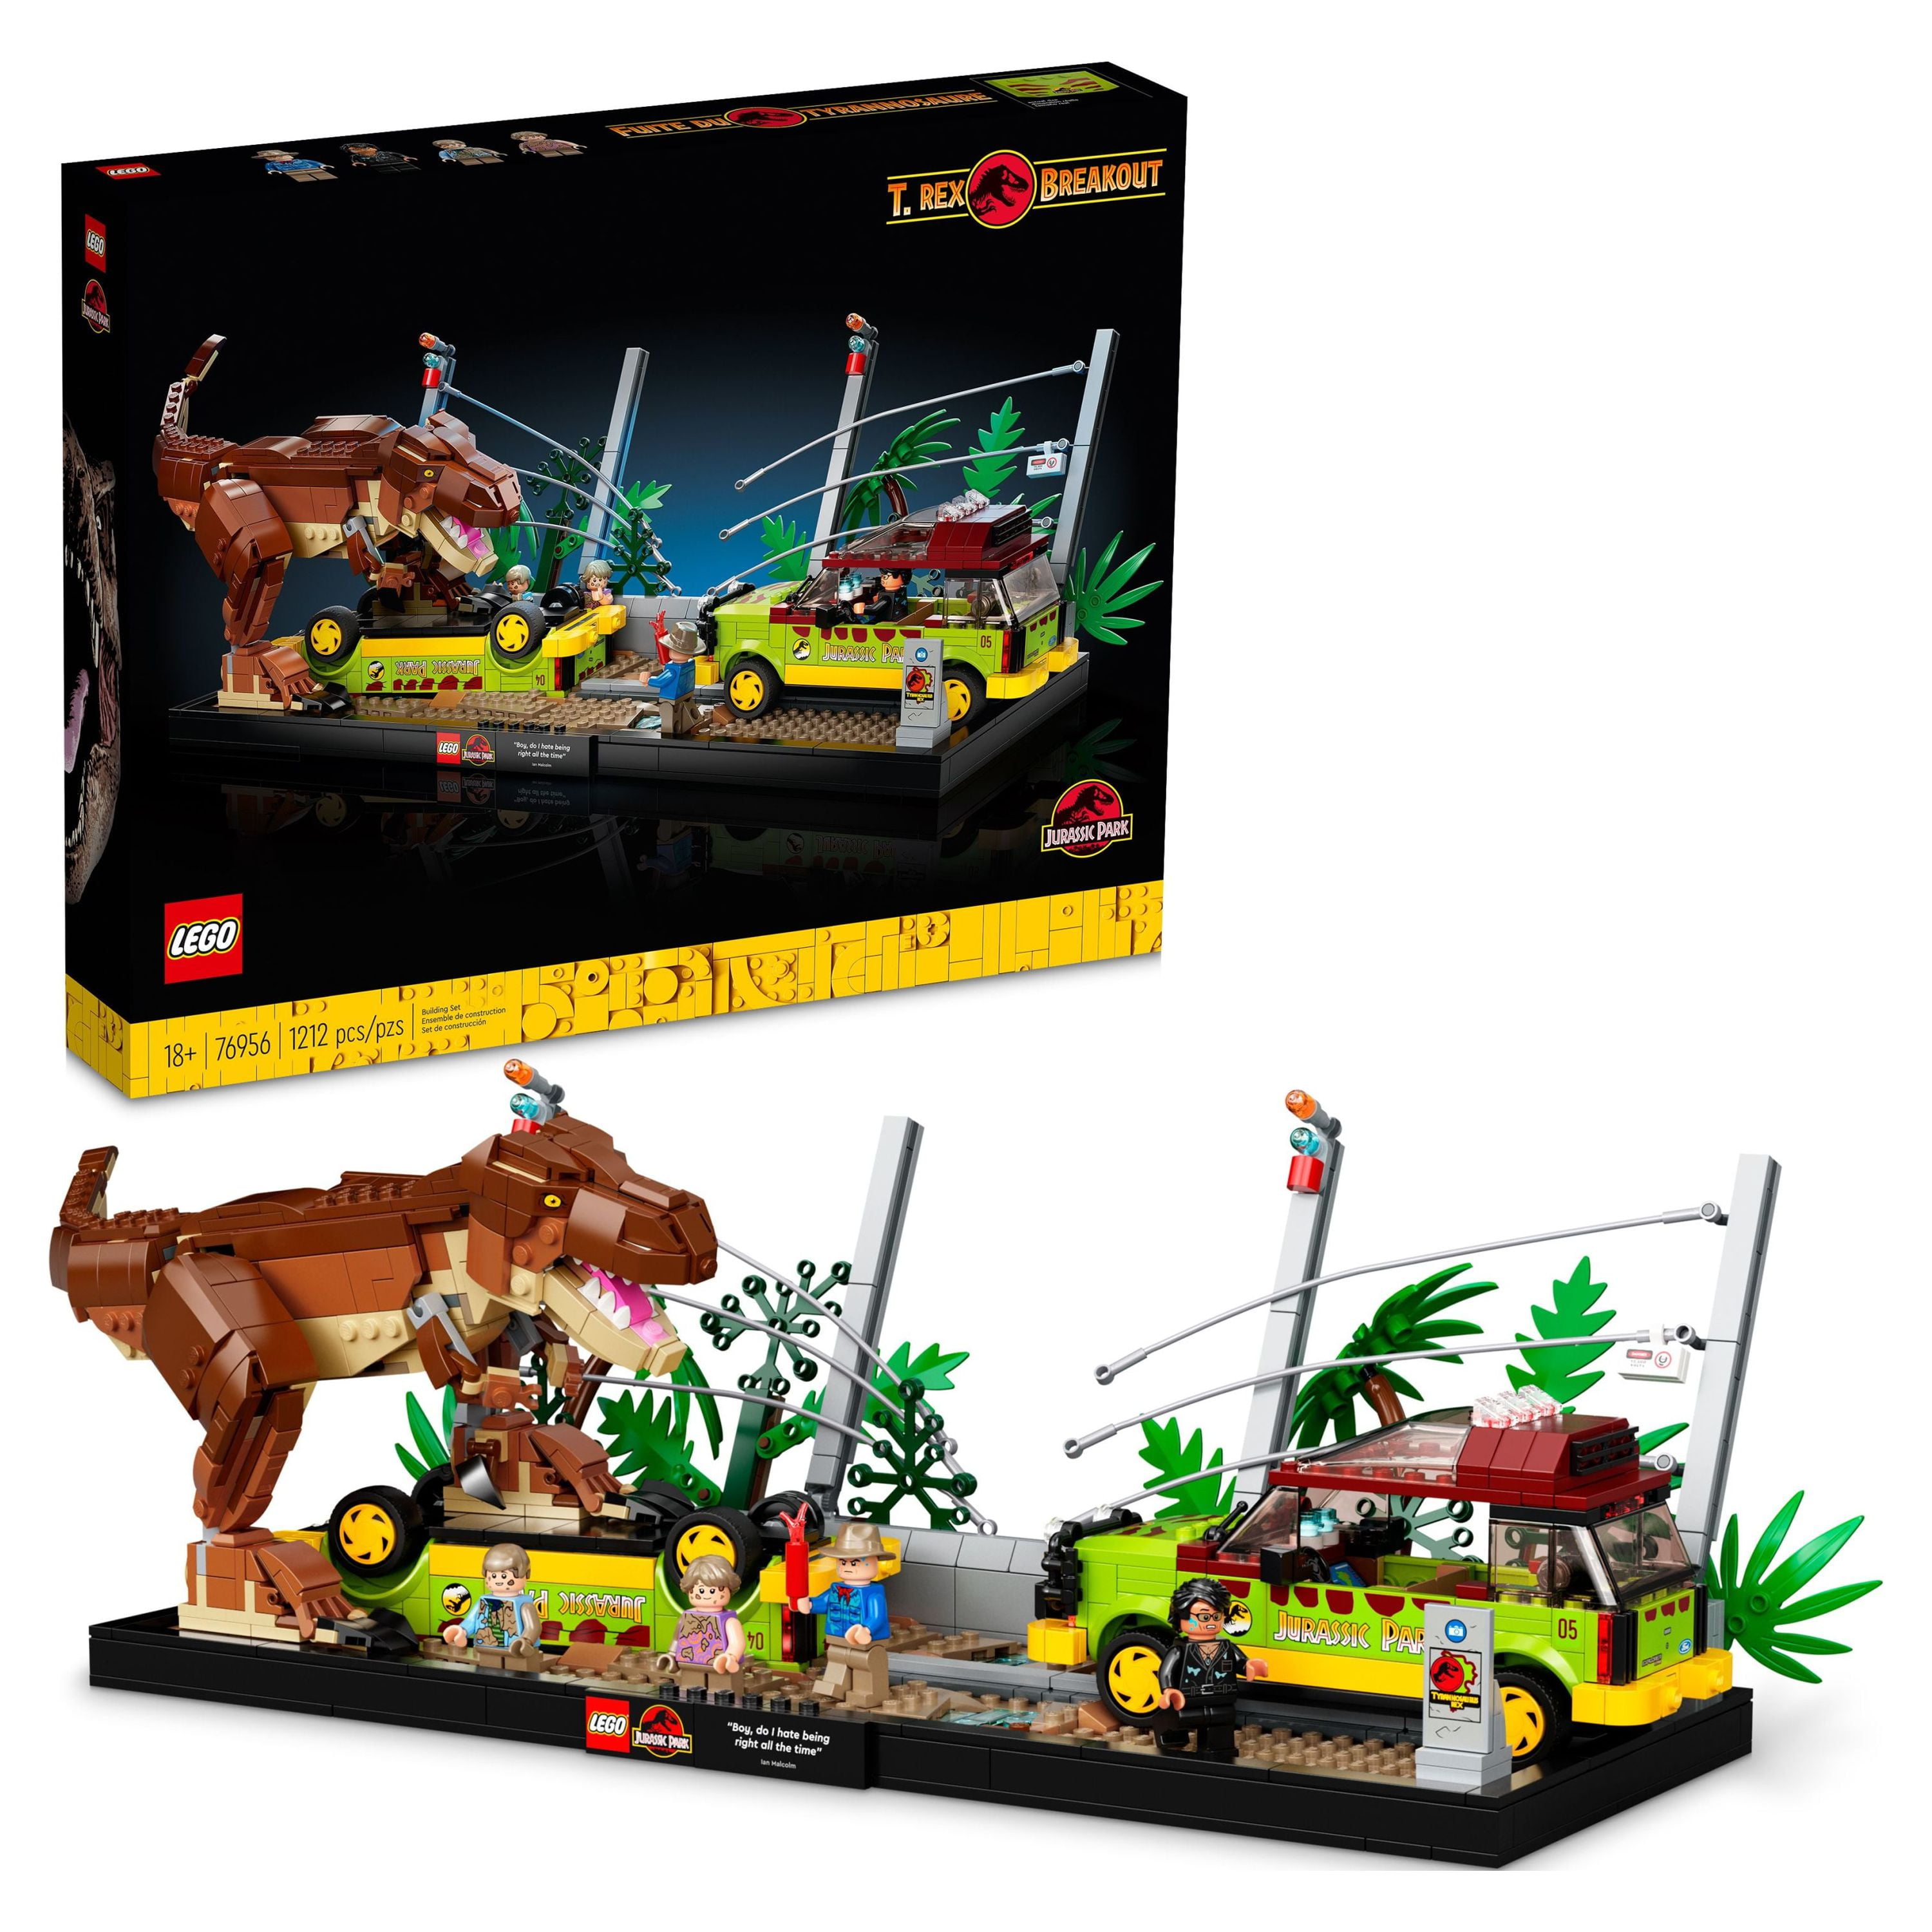 LEGO Jurassic Park T. rex Breakout 76956 Dinosaur Model Kit with 2 Ford  Explorer Cars and 4 Minifigures, Nostalgic 90's Movie Gift Idea for Adults  and Teens 